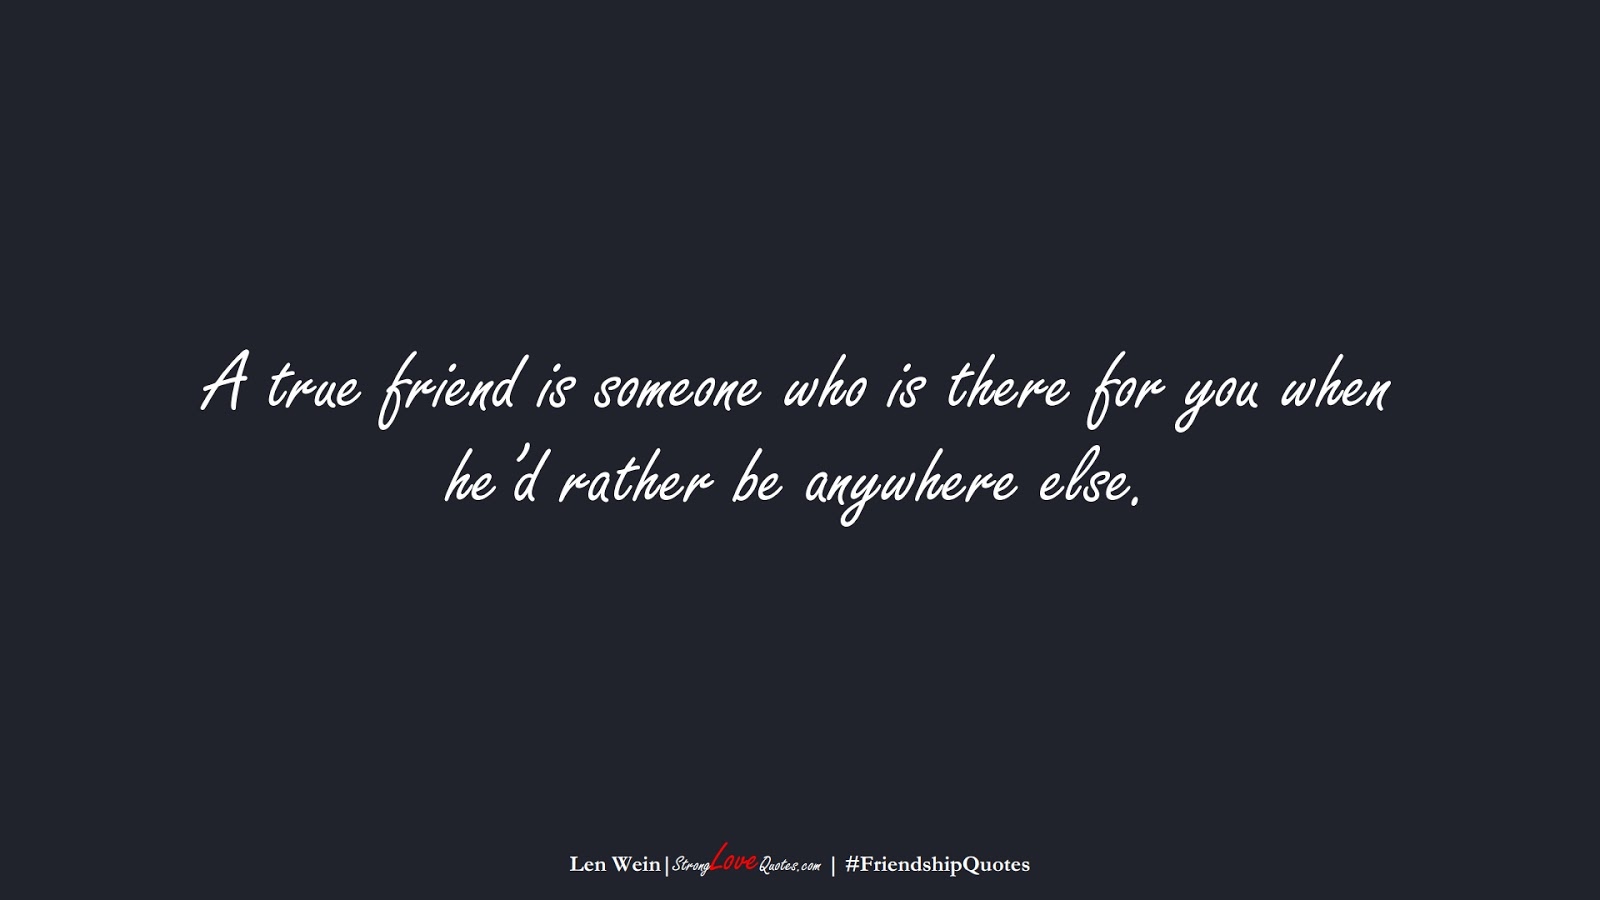 A true friend is someone who is there for you when he’d rather be anywhere else. (Len Wein);  #FriendshipQuotes